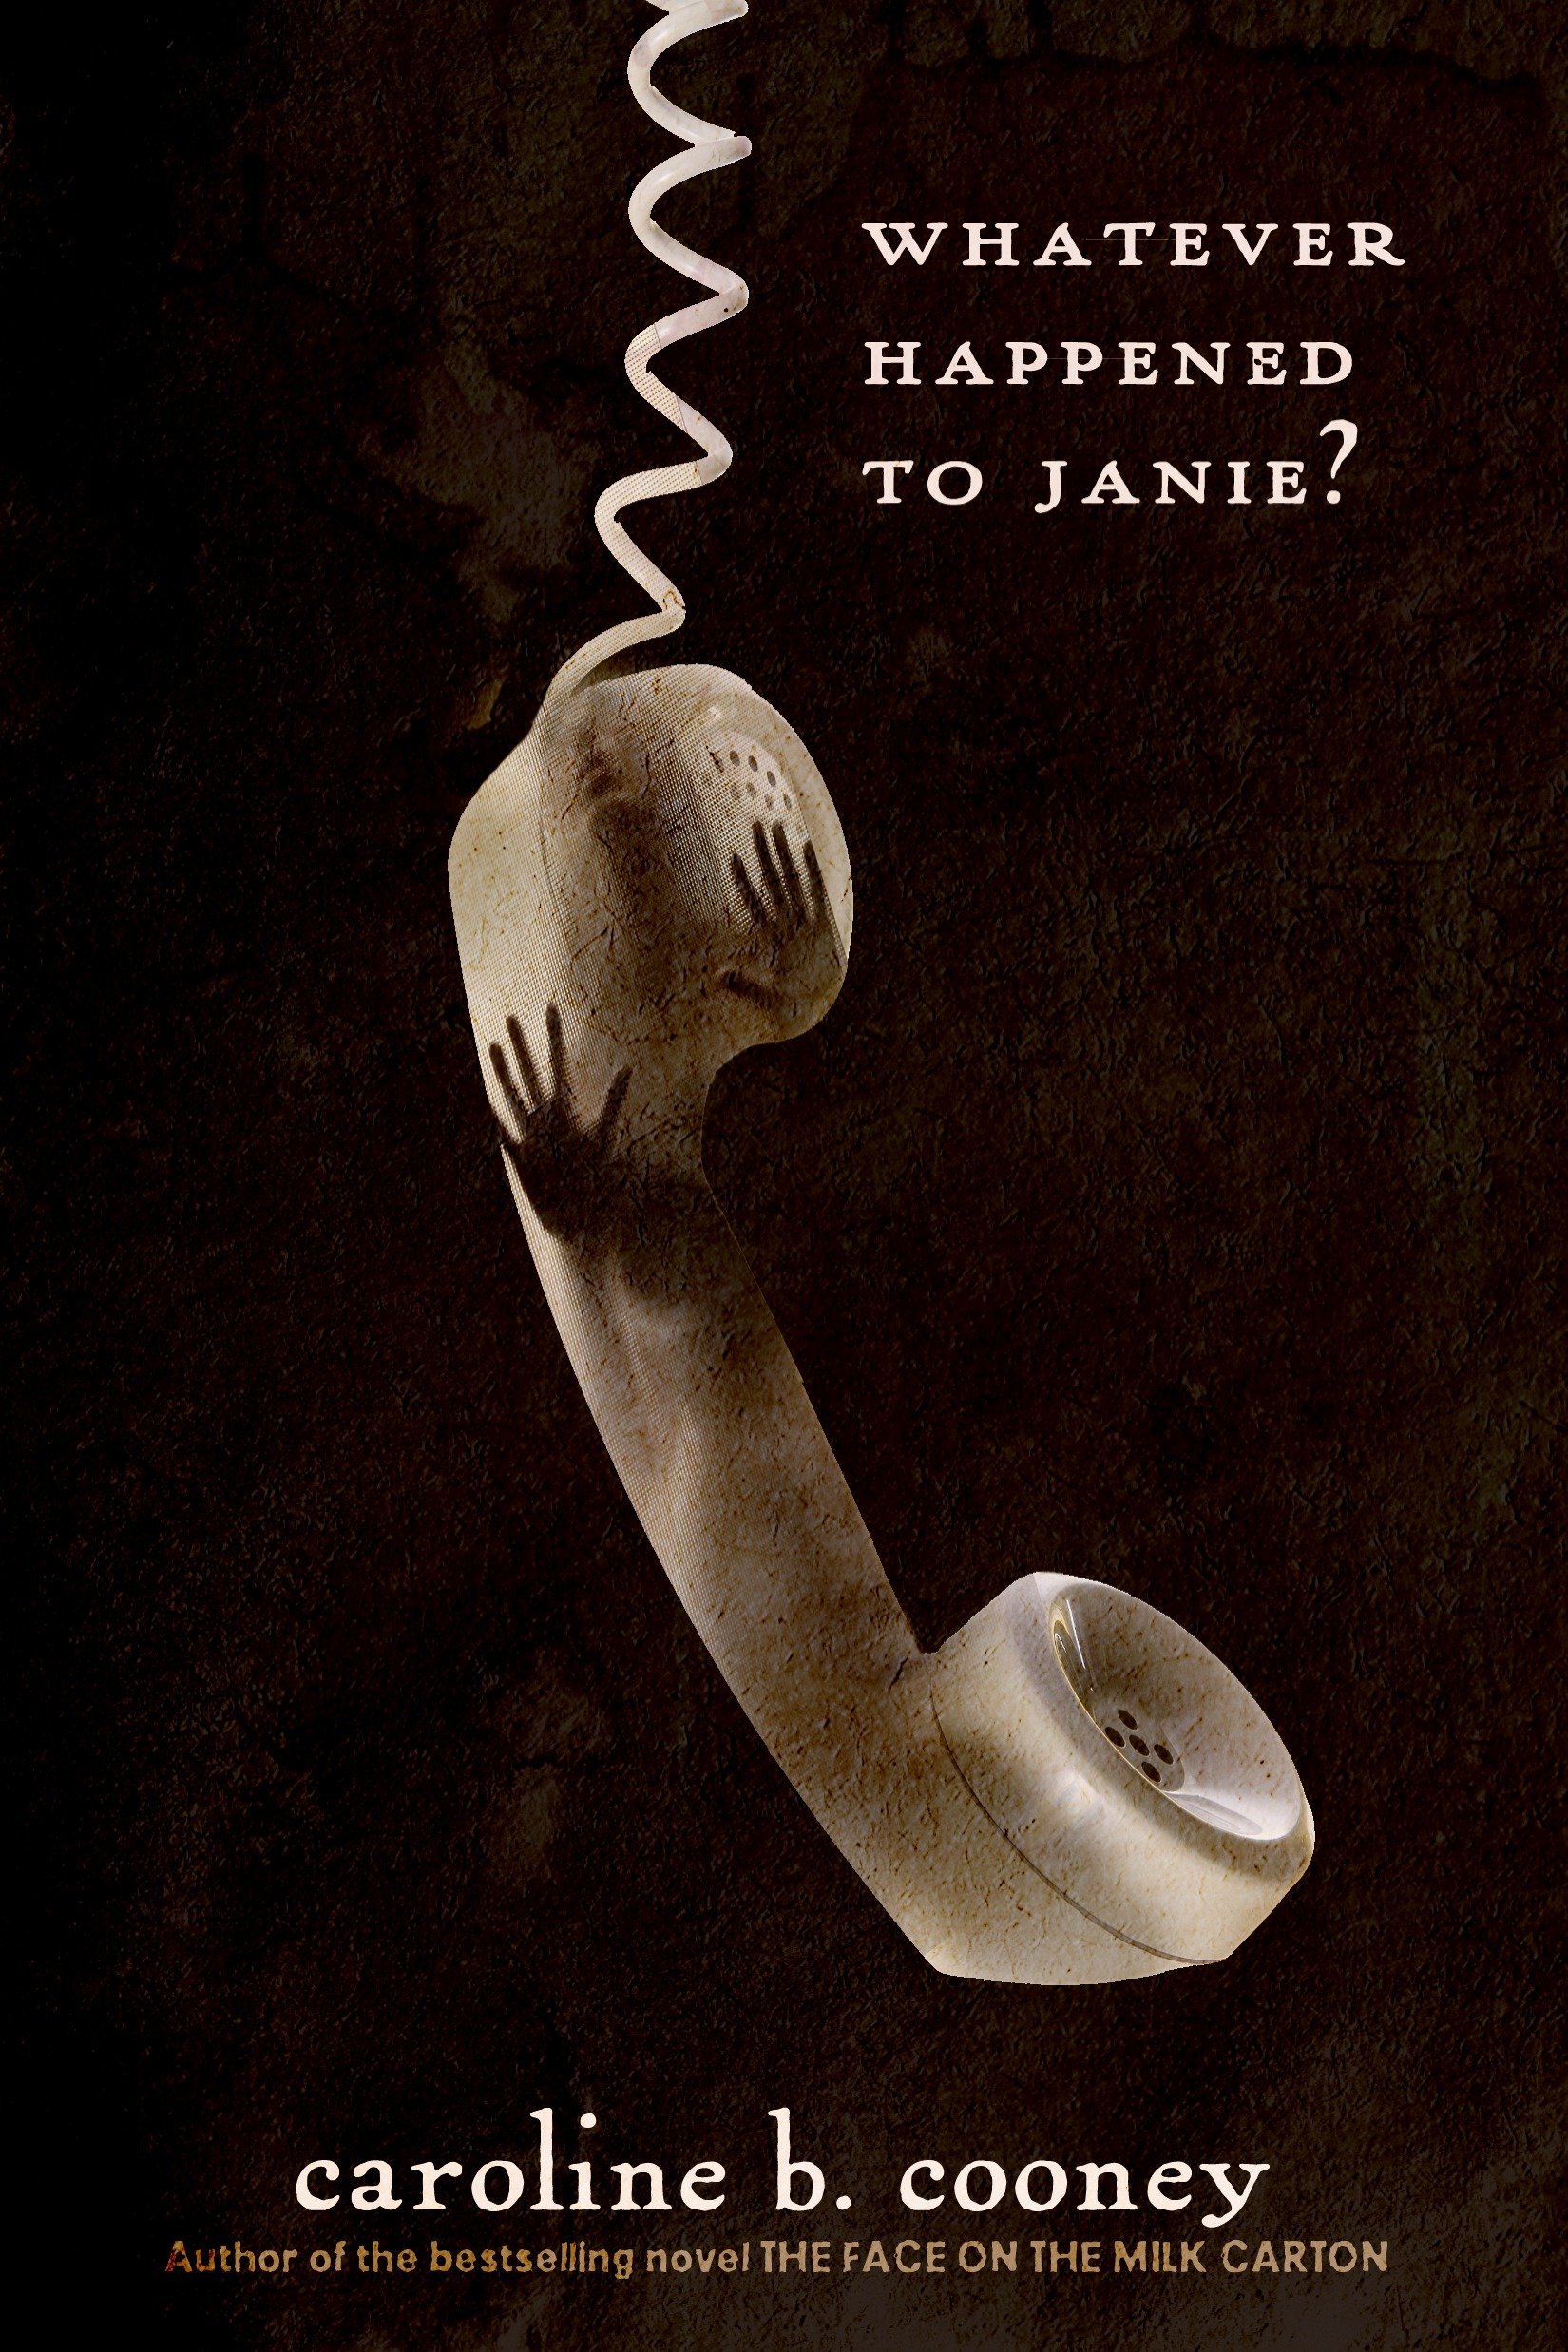 Whatever happened to Janie? magazine reviews